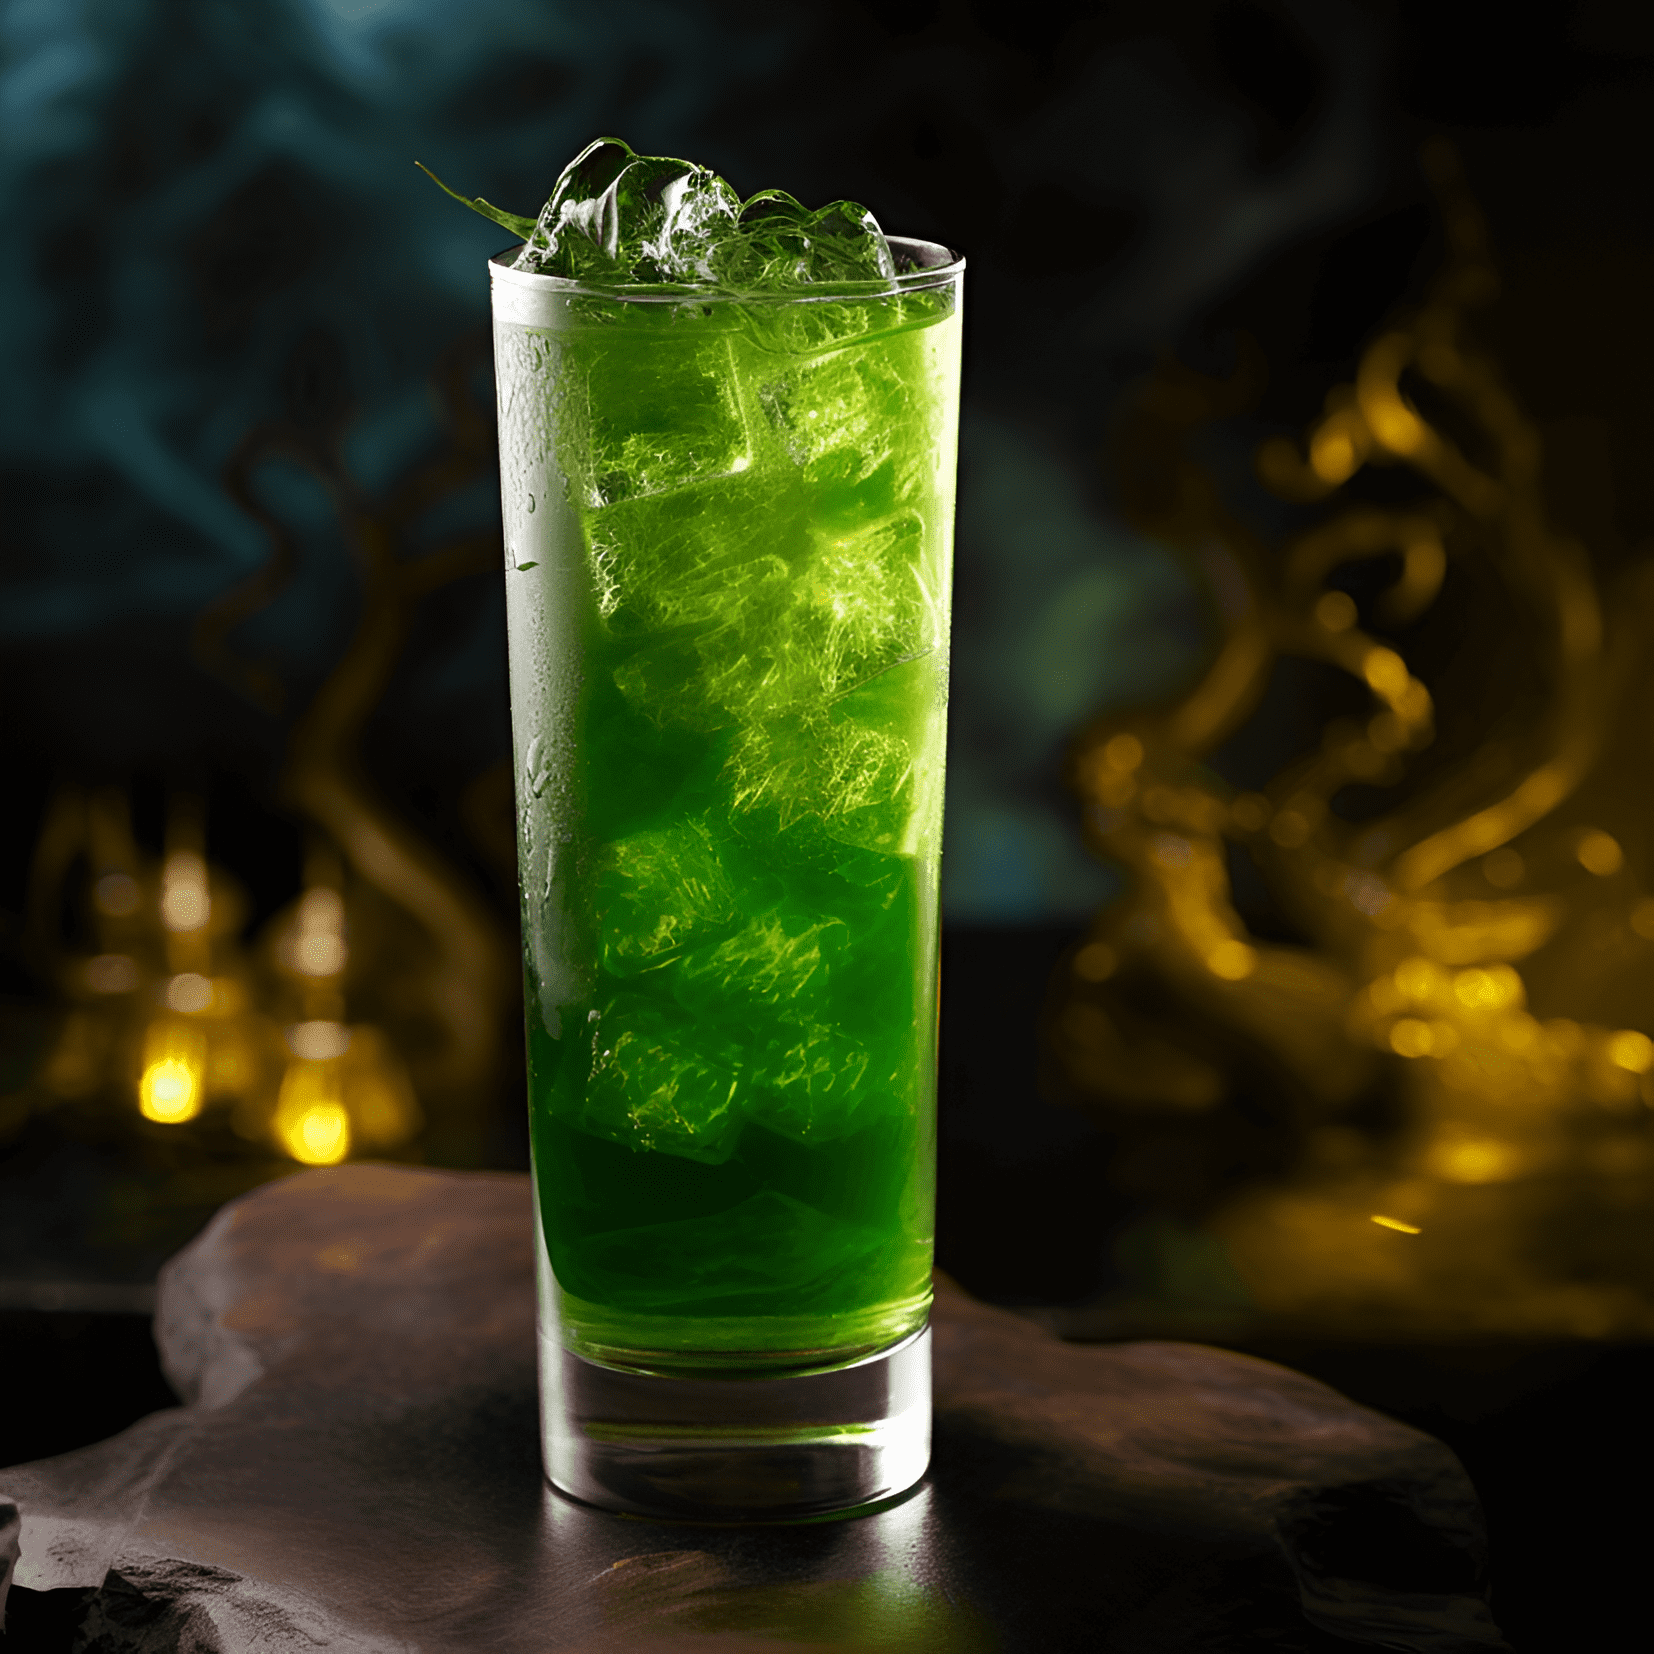 Green Dragon Cocktail Recipe - The Green Dragon cocktail is a delightful combination of sweet, sour, and slightly bitter flavors. The drink is well-balanced, with a refreshing and invigorating taste that is perfect for those who enjoy a little adventure in their cocktails.